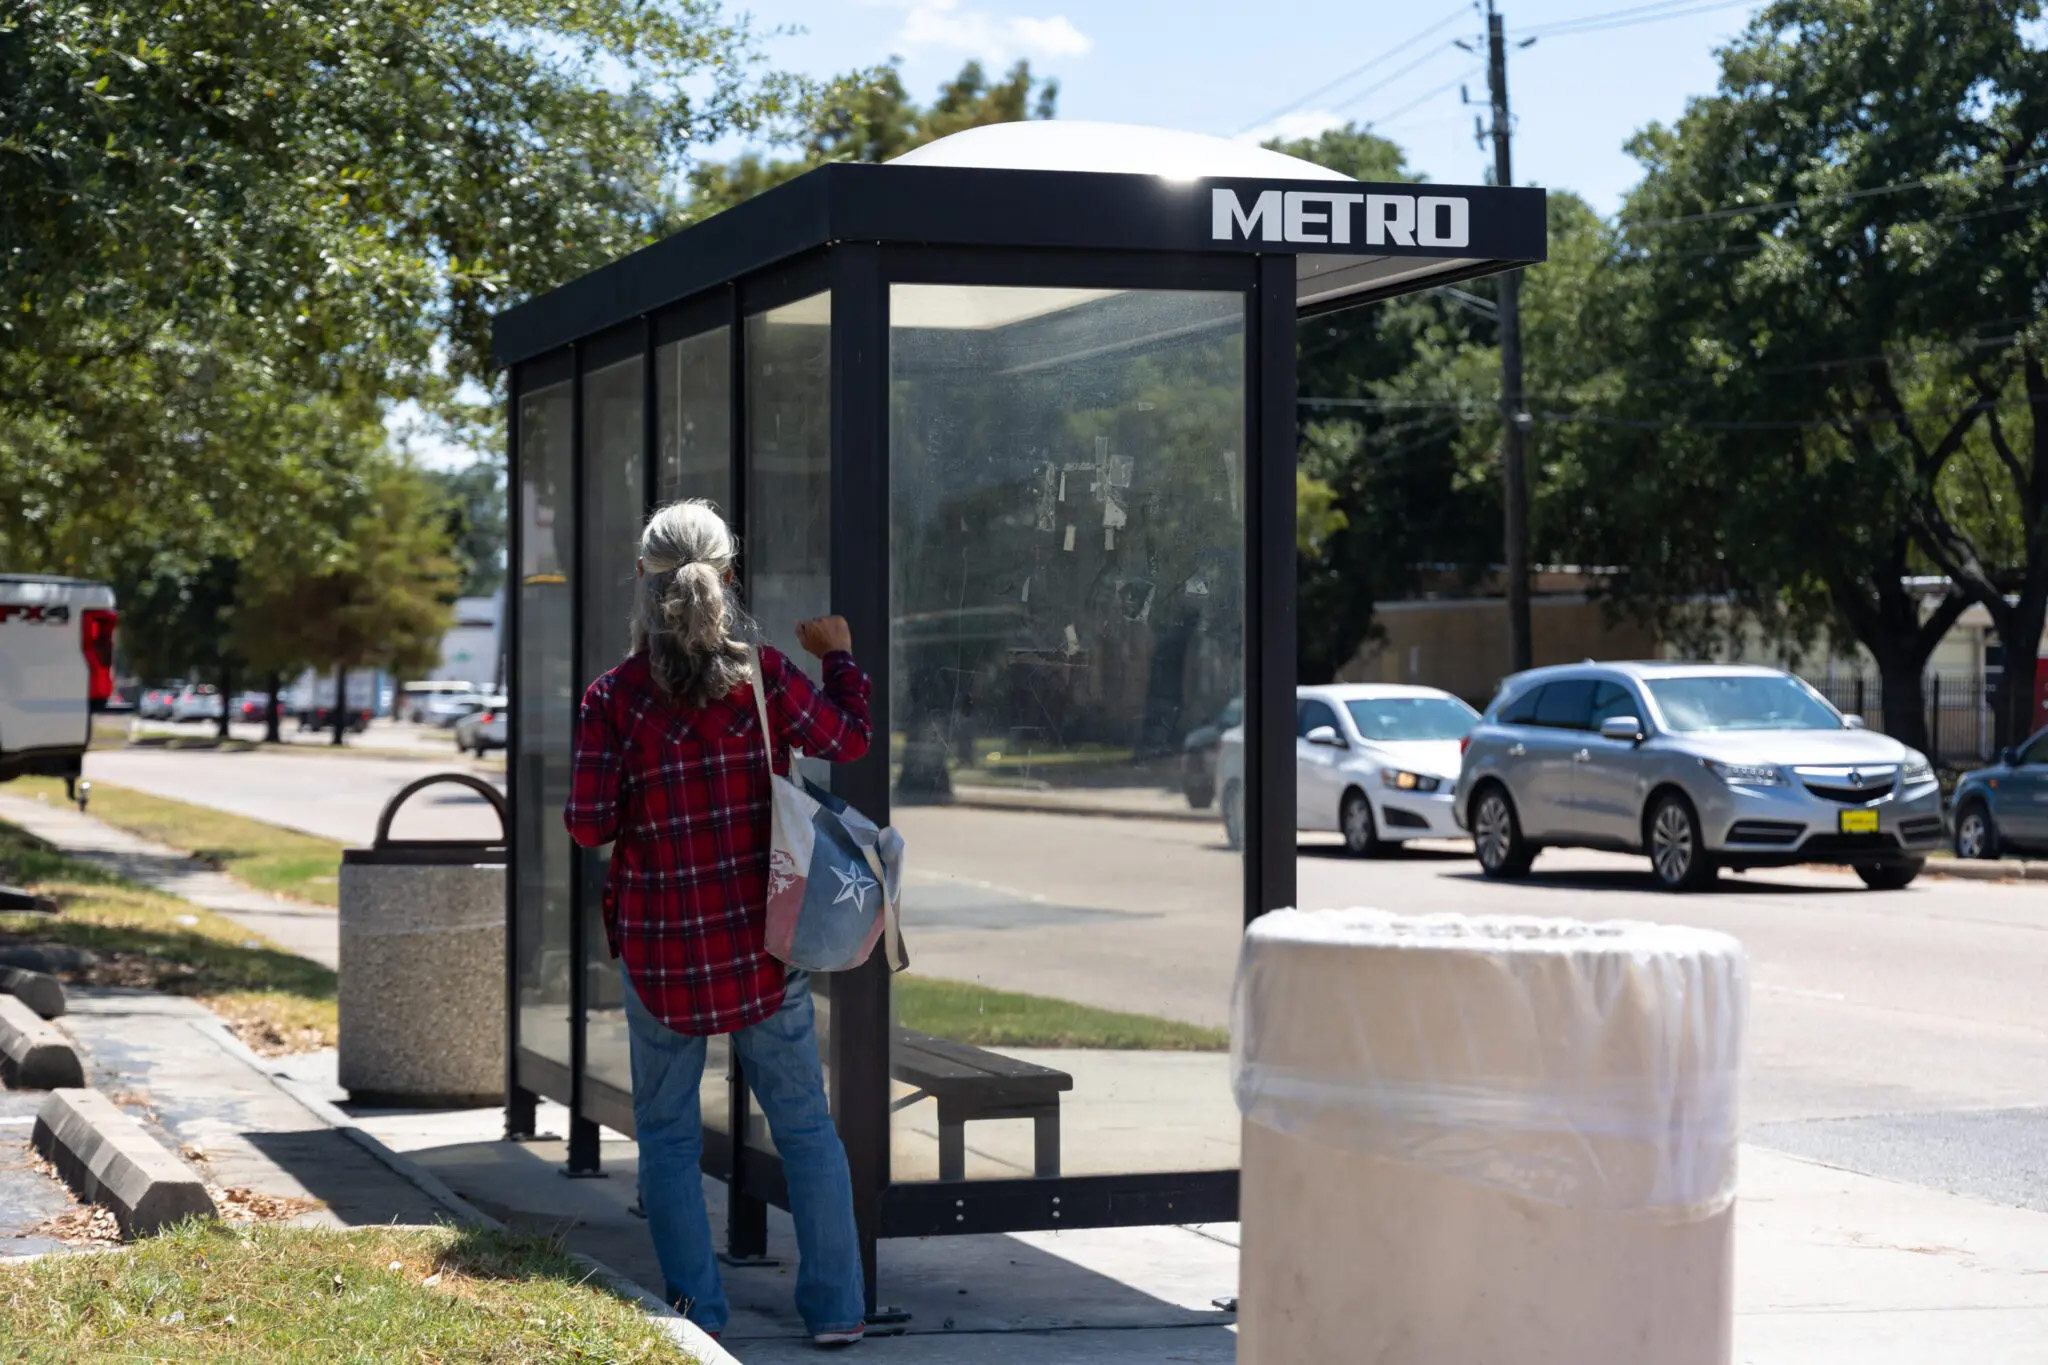 A gray-haired woman waits by the shade of a covered bus stop near a road on a sunny day.